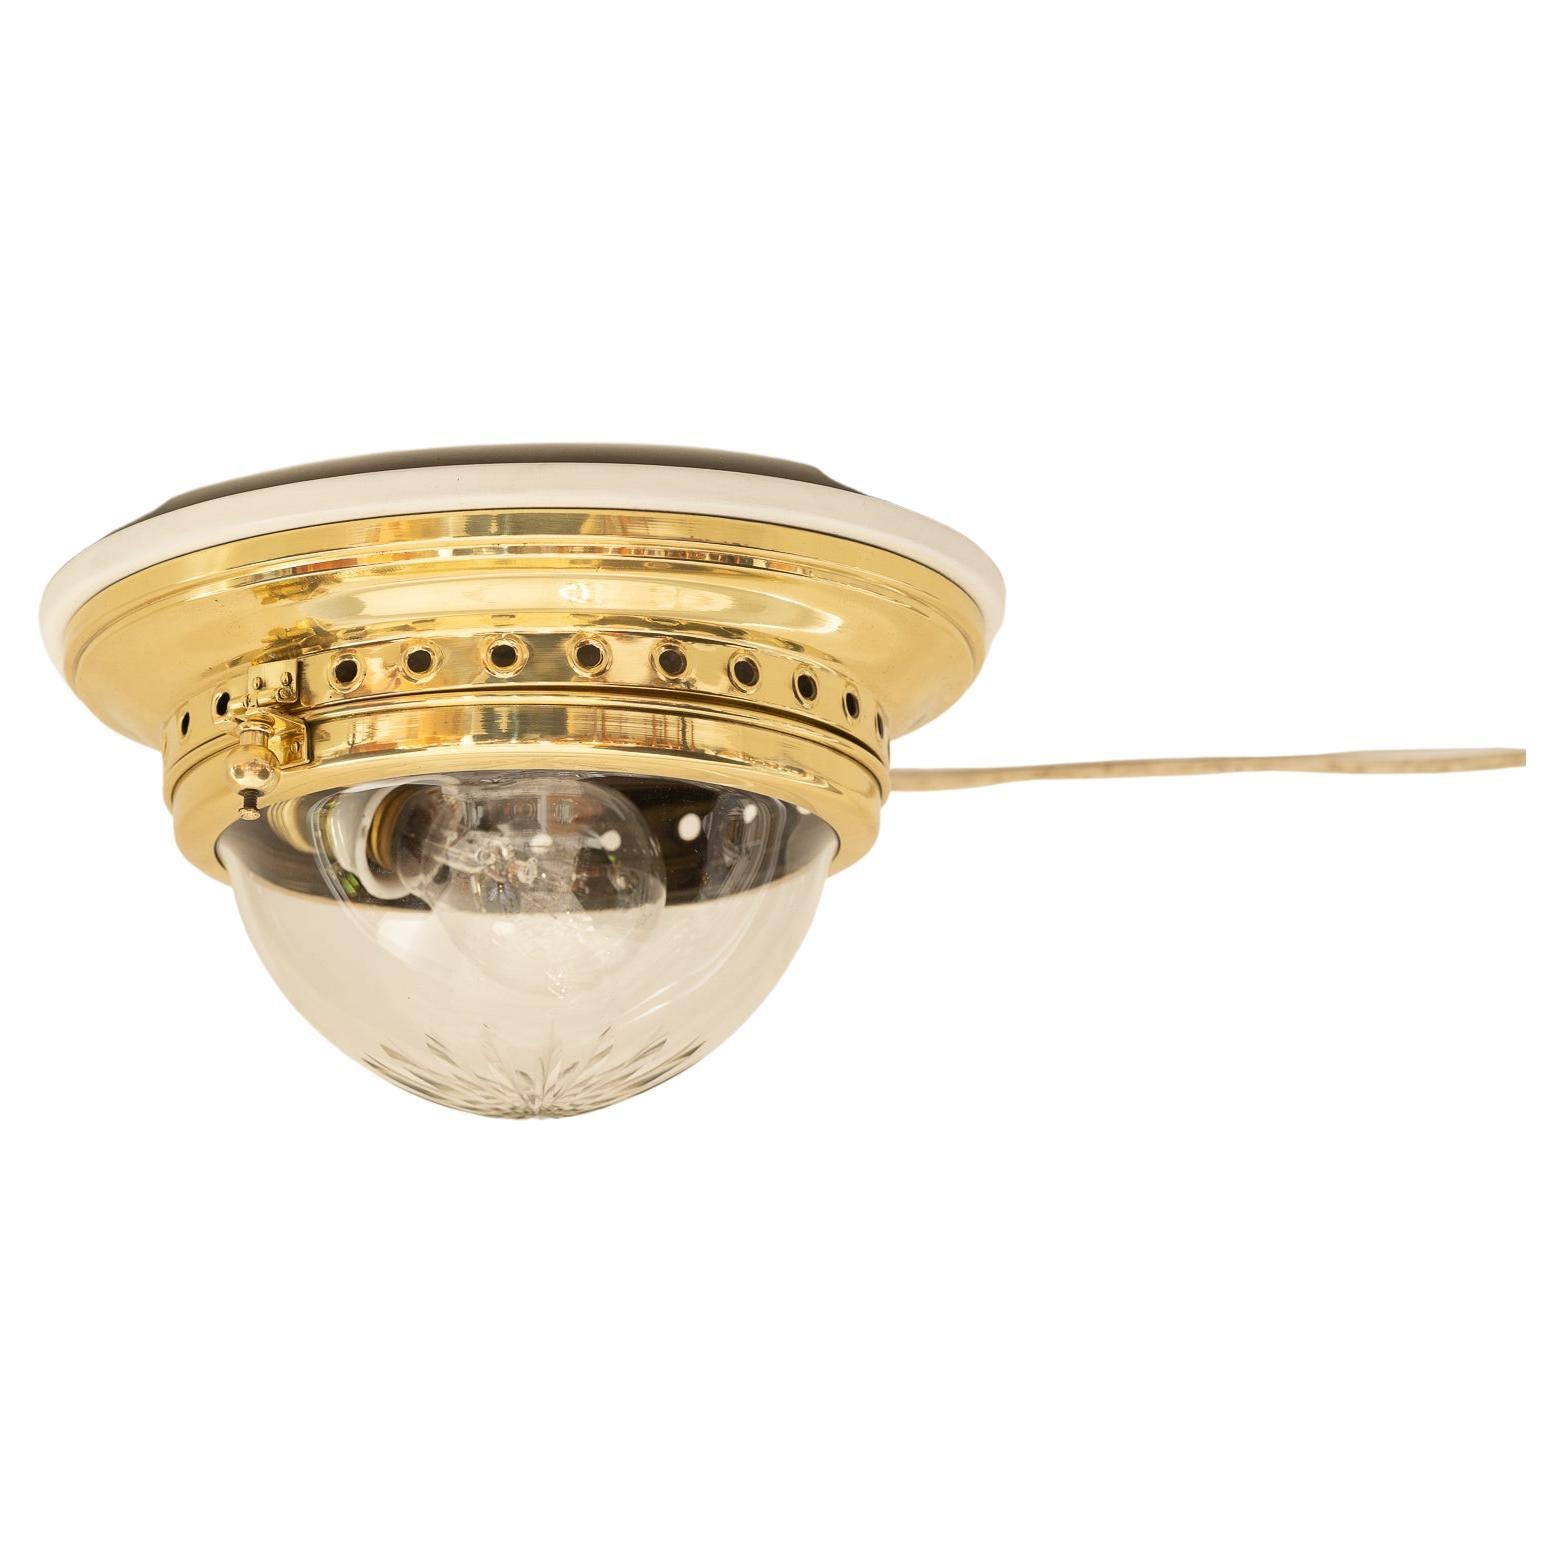 Small Art Deco Ceiling Lamp with Original Cut Glass Shade, Around 1920s For Sale